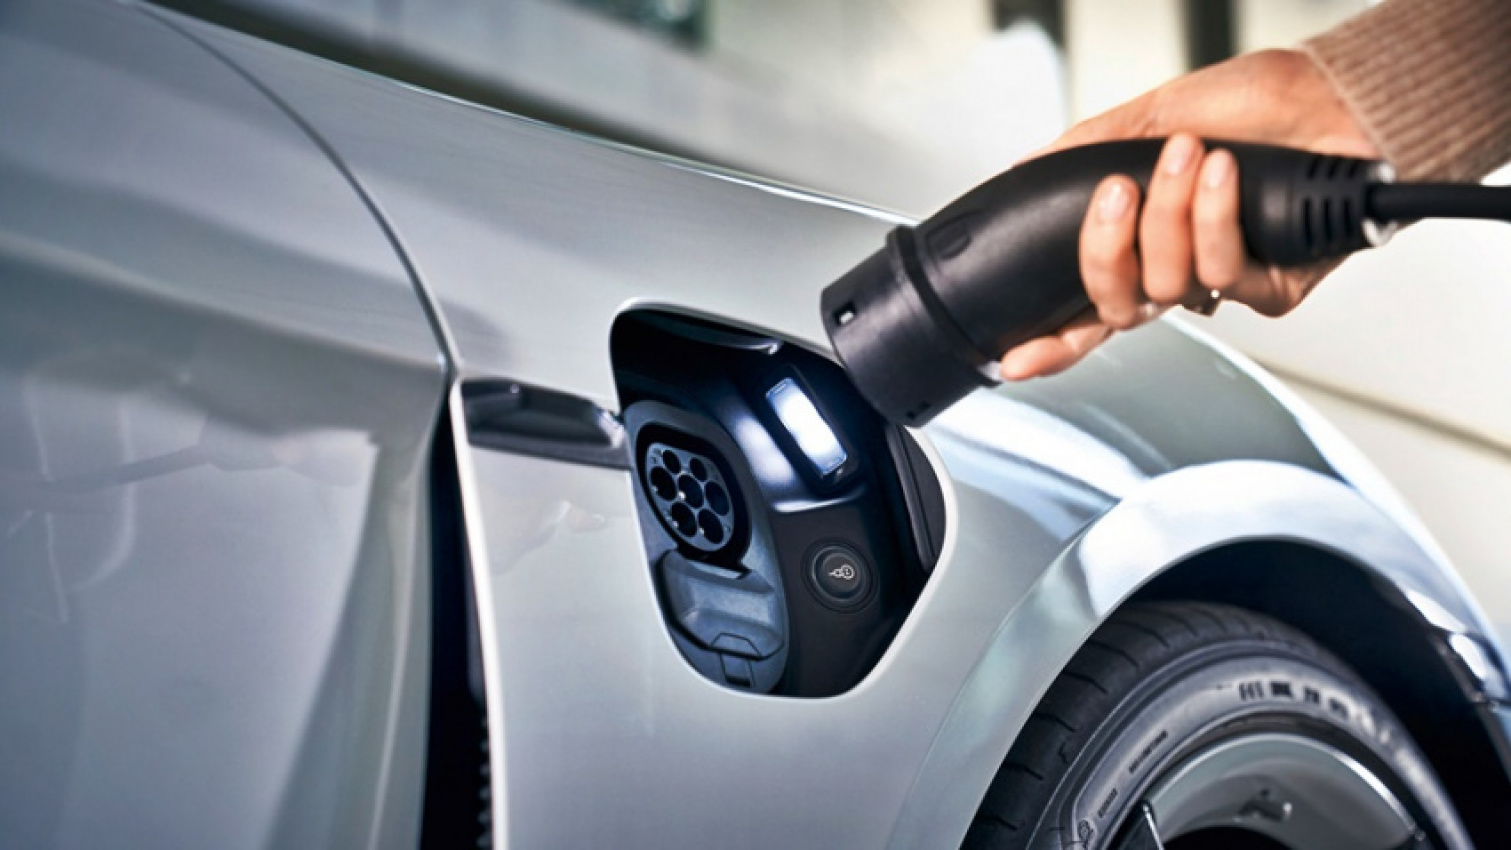 autos, cars, porsche, charging network, dc chargers, electric vehicles, porsche asia pacific, porsche destination charging, recharging stations, sime darby auto performance, shell and porsche team up to provide first cross-border high-performance charging network in southeast asia